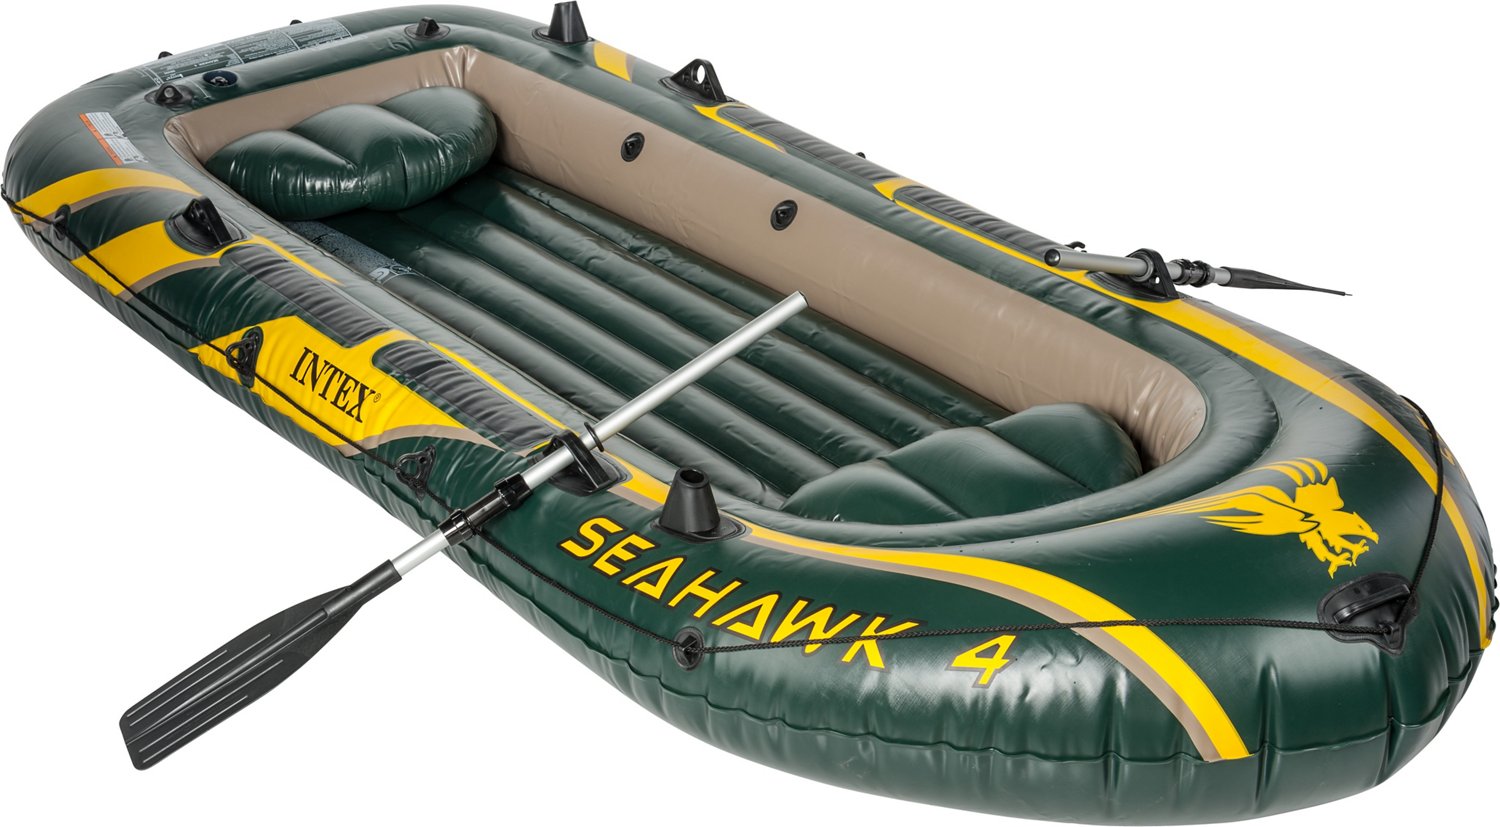 INTEX Seahawk 11 ft 7 in Inflatable Boat Set